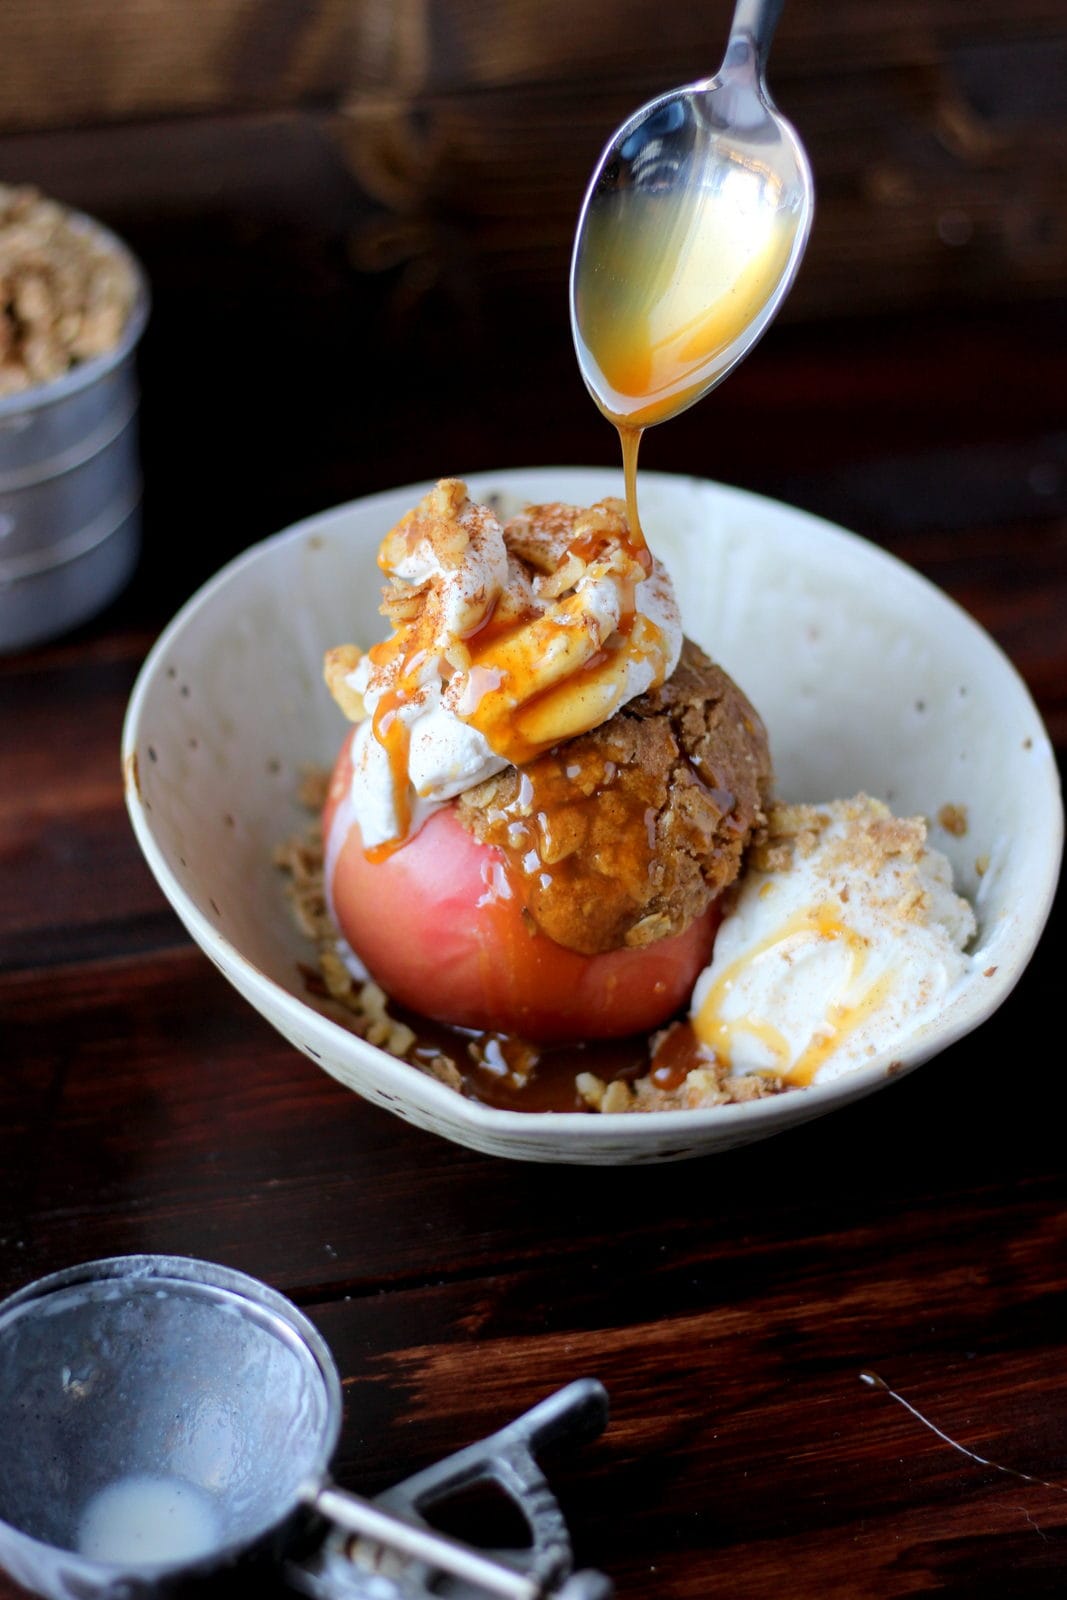 Stuffed Apples + Cardamom Whipped Cream and Vanilla Bean Ice Cream topped with Walnuts and Caramel Sauce. The perfect dessert for fall! Includes instructions on how to make homemade whipped cream! thewoodenskillet.com #foodphotography #foodstyling